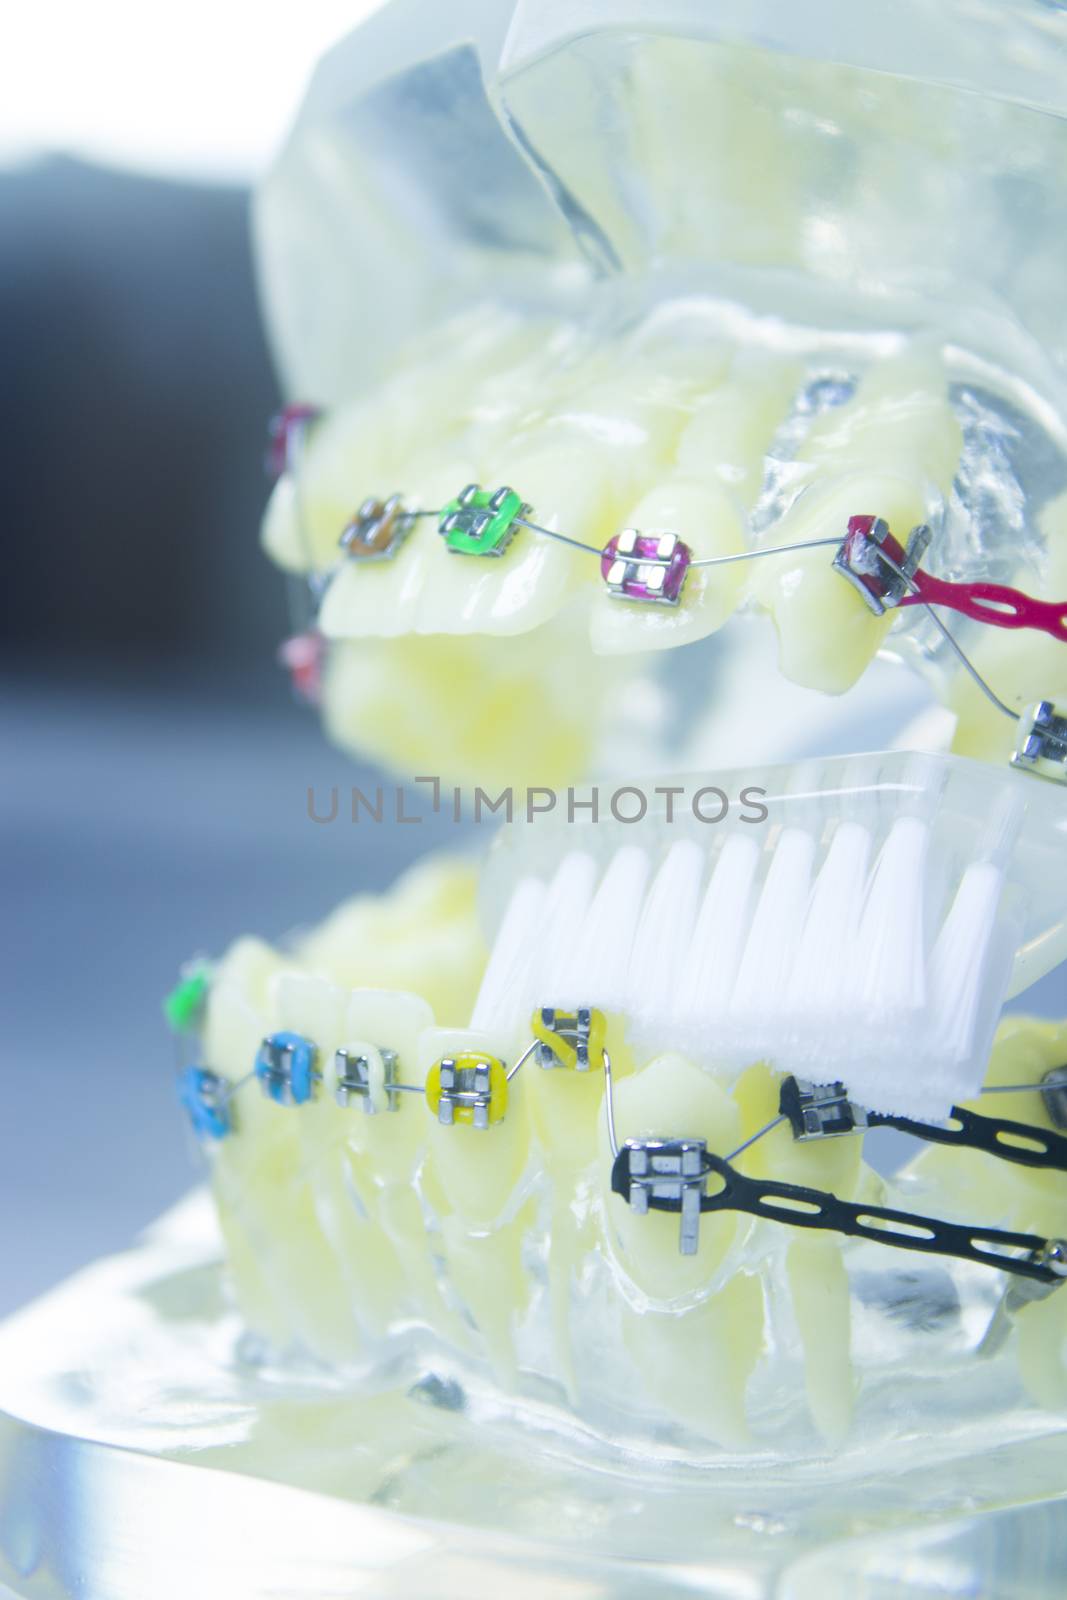 Model denture with metal orthodontics by GemaIbarra